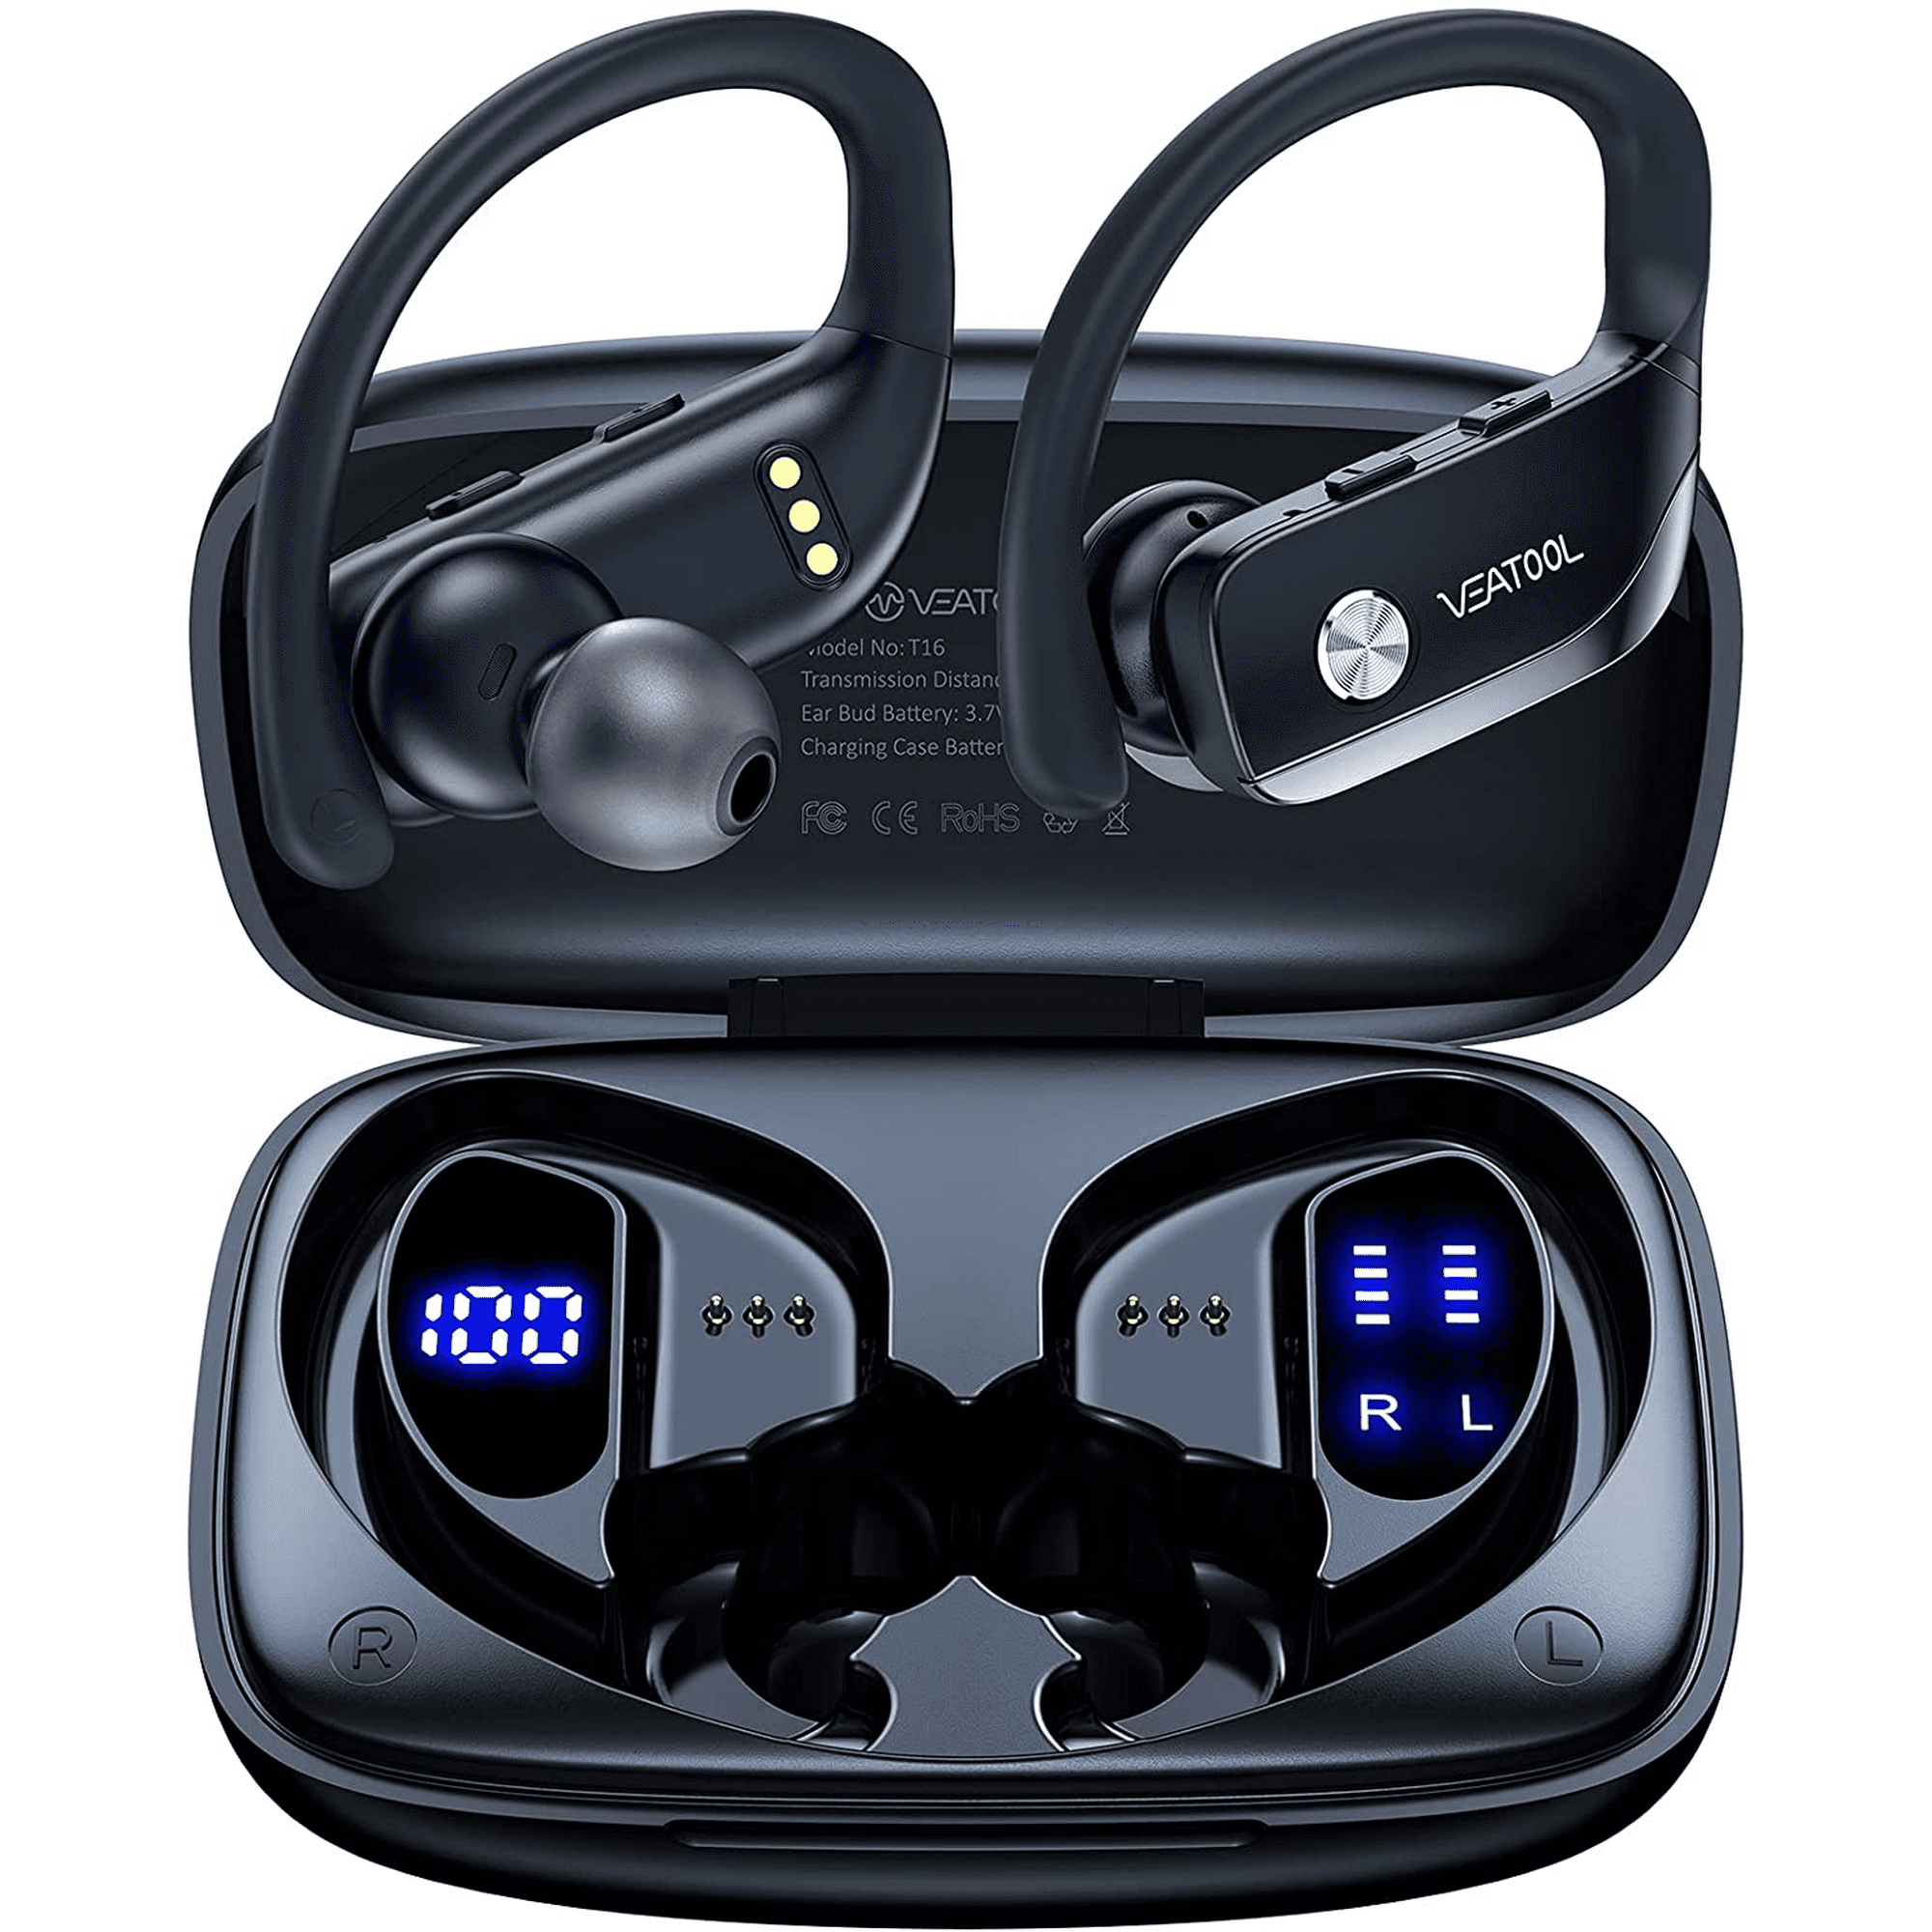 Wireless Earbuds, Bluetooth 5.0 True Wireless Headphones Sports Bluetooth Earphones Over-Ear Noise Cancelling Earbuds with Display Over-Ear Buds with Earhooks Built-in Mic Headset for Workout - Walmart.com